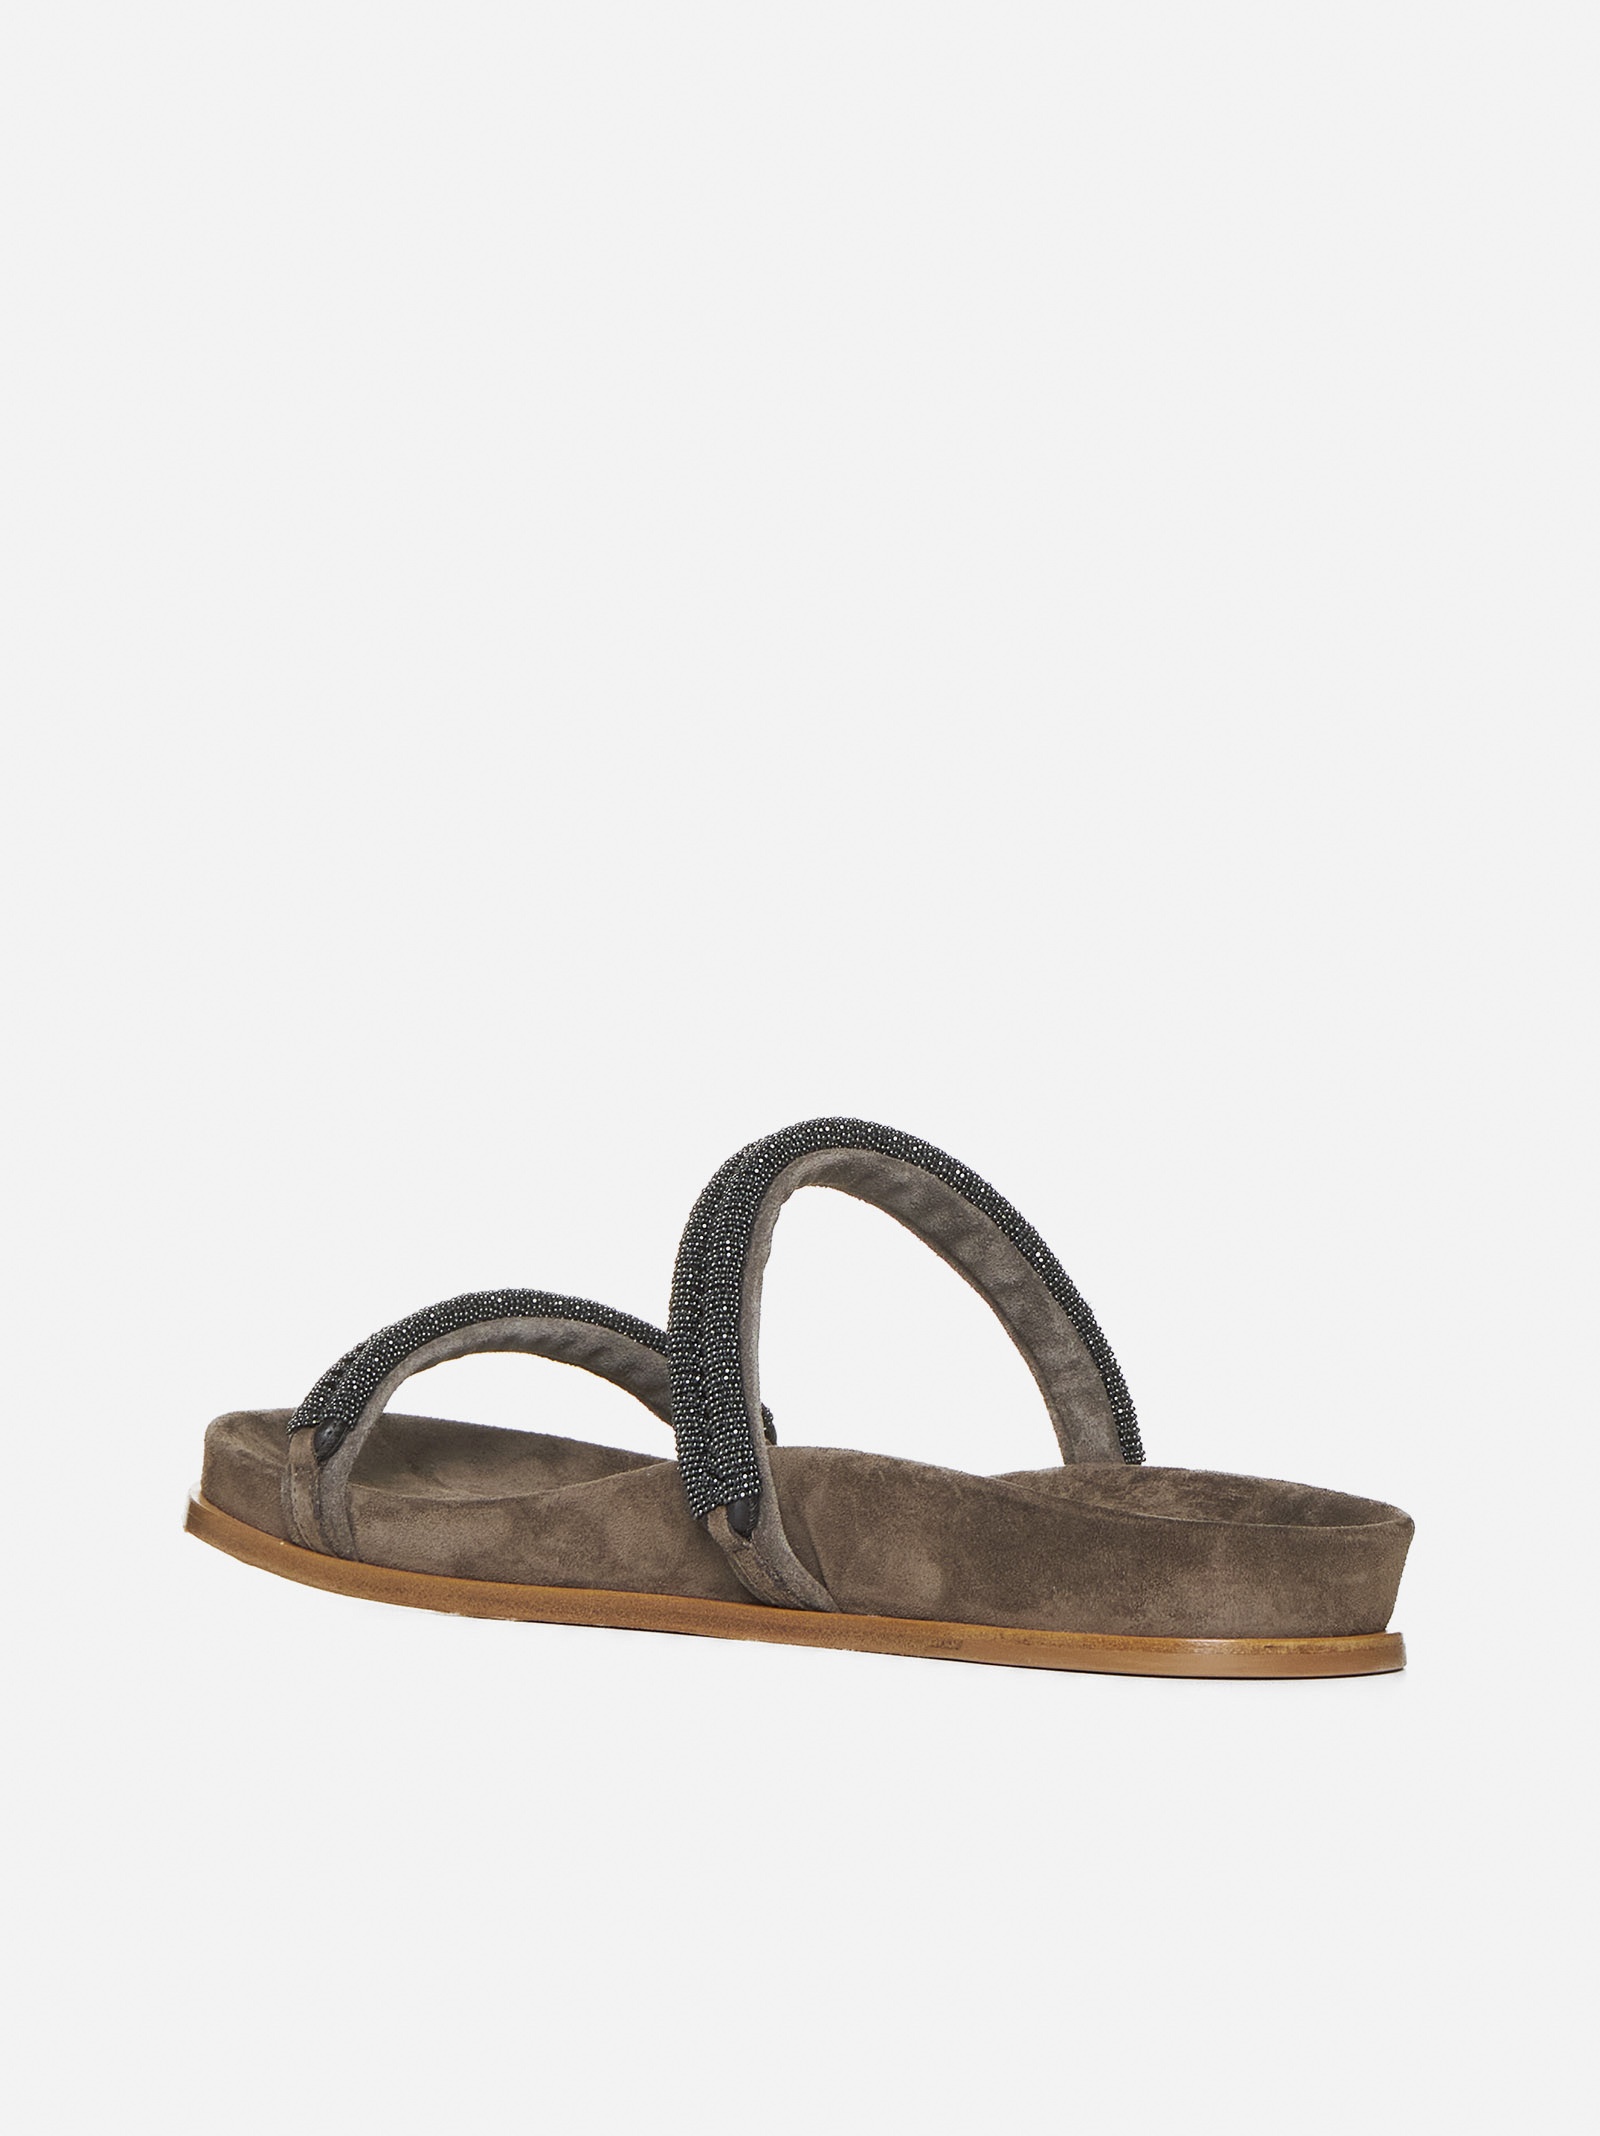 Monile and suede sandals - 3